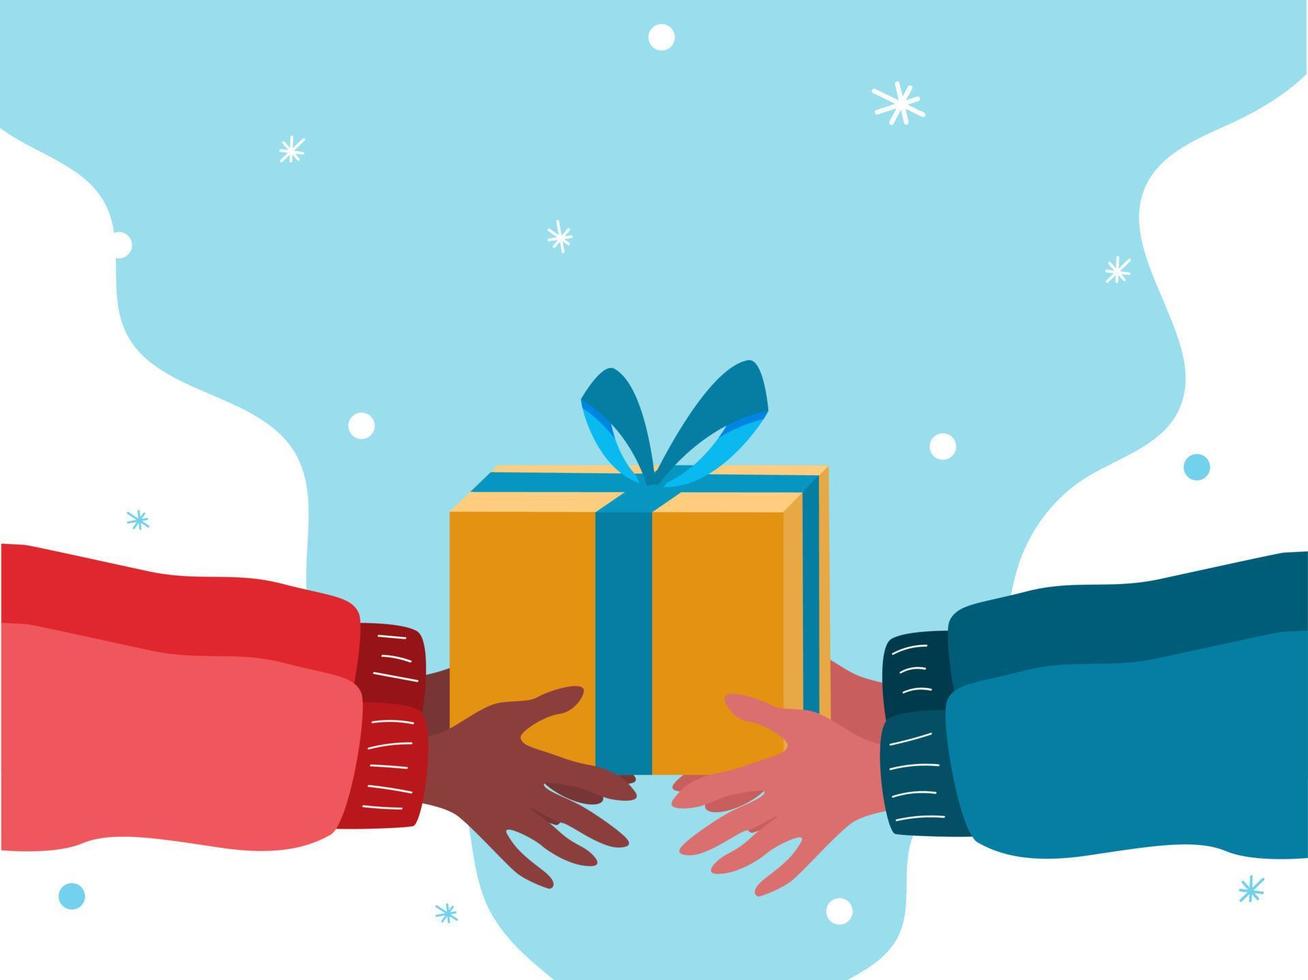 Vector illustration of human hands handing over a gift box. The season of giving concept for Christmas holiday design.